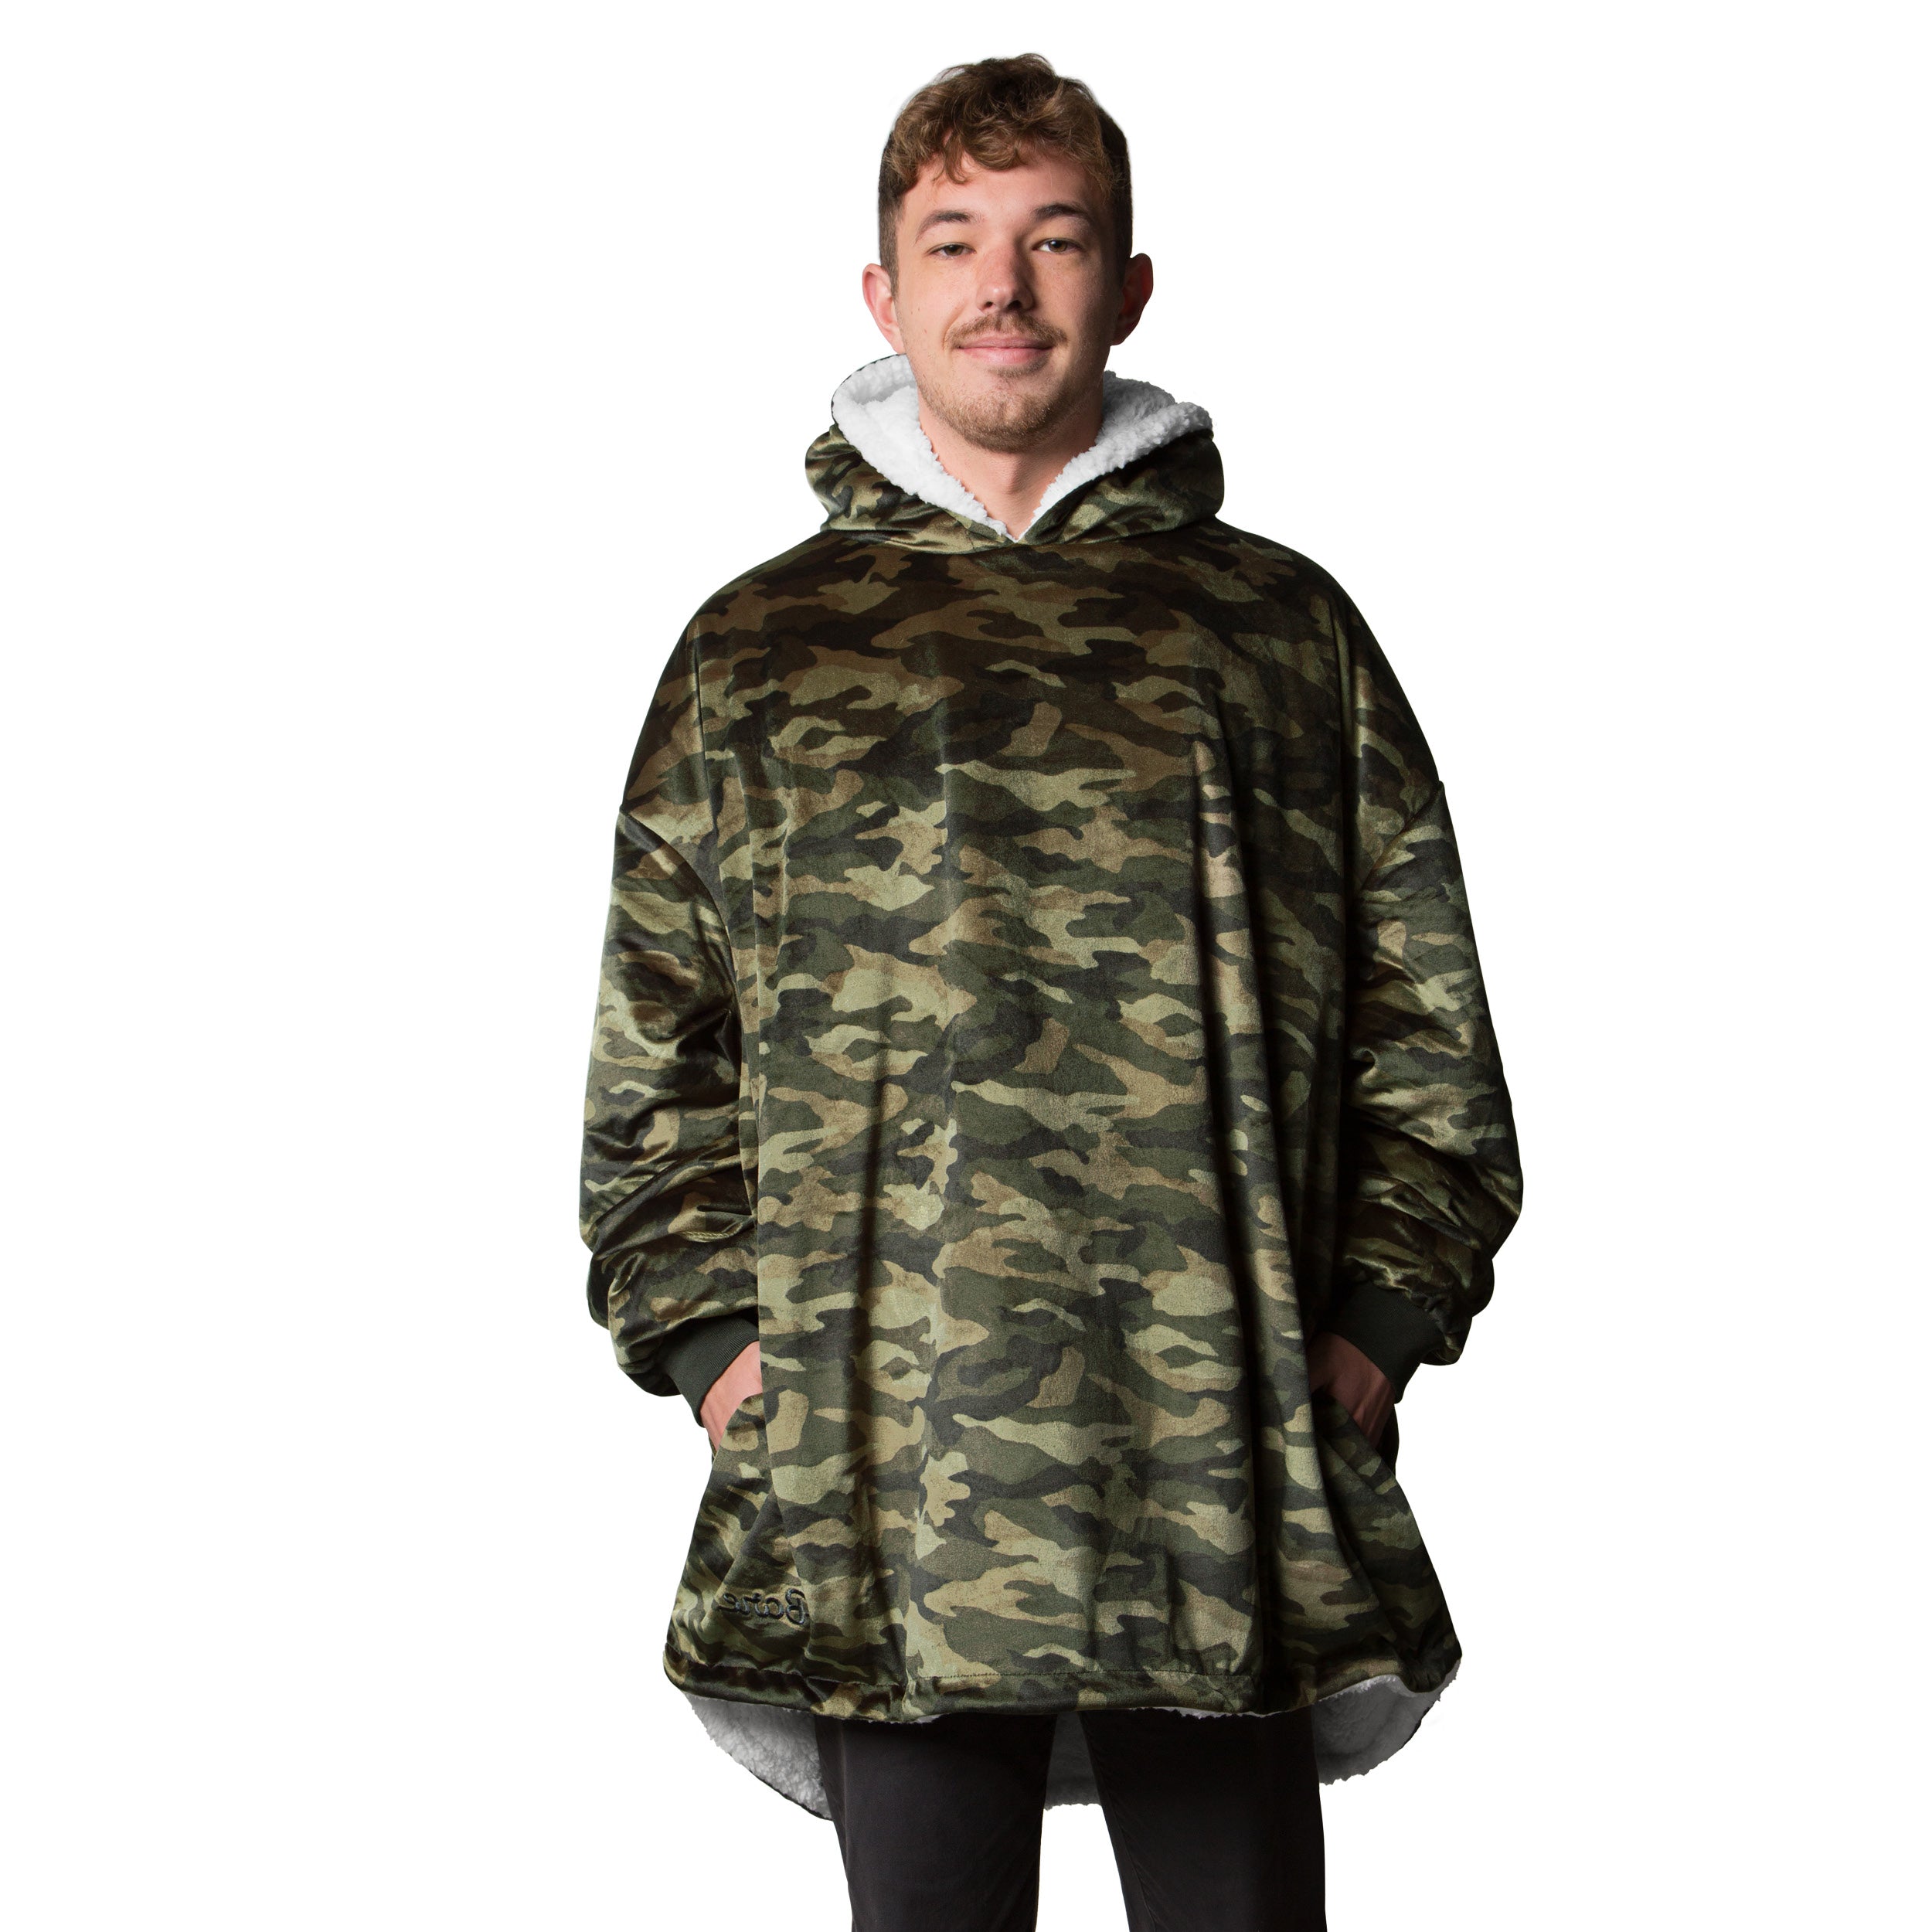 A man is standing while wearing a sherpa wearable blanket